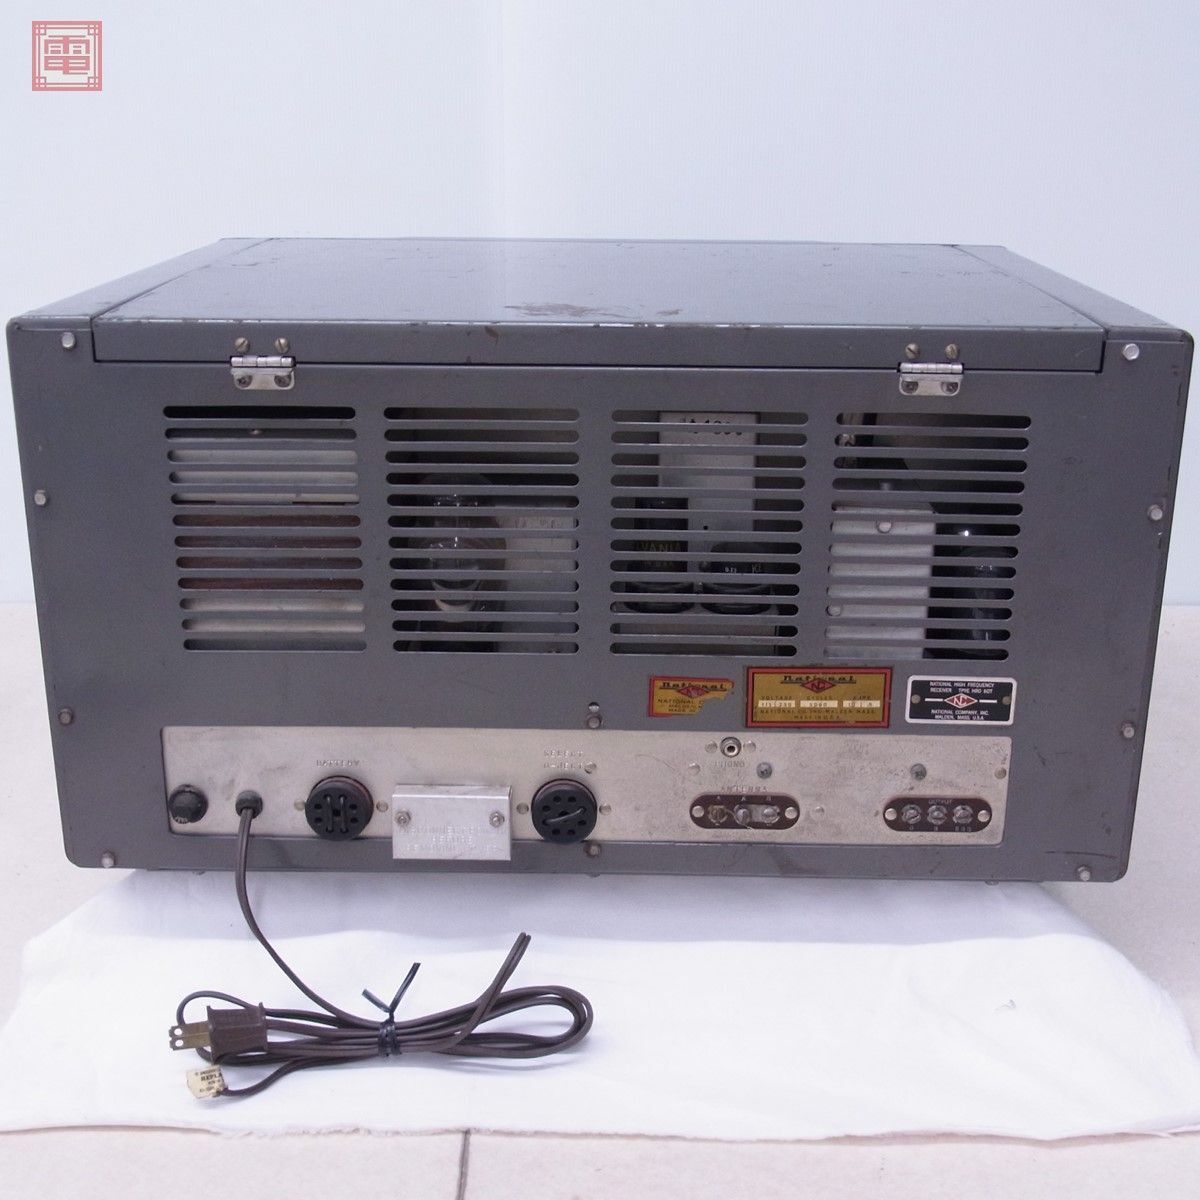  American National HRO 60T vacuum tube receiver National HRO-60T HRO Sixty electrification only verification details not yet verification [FG